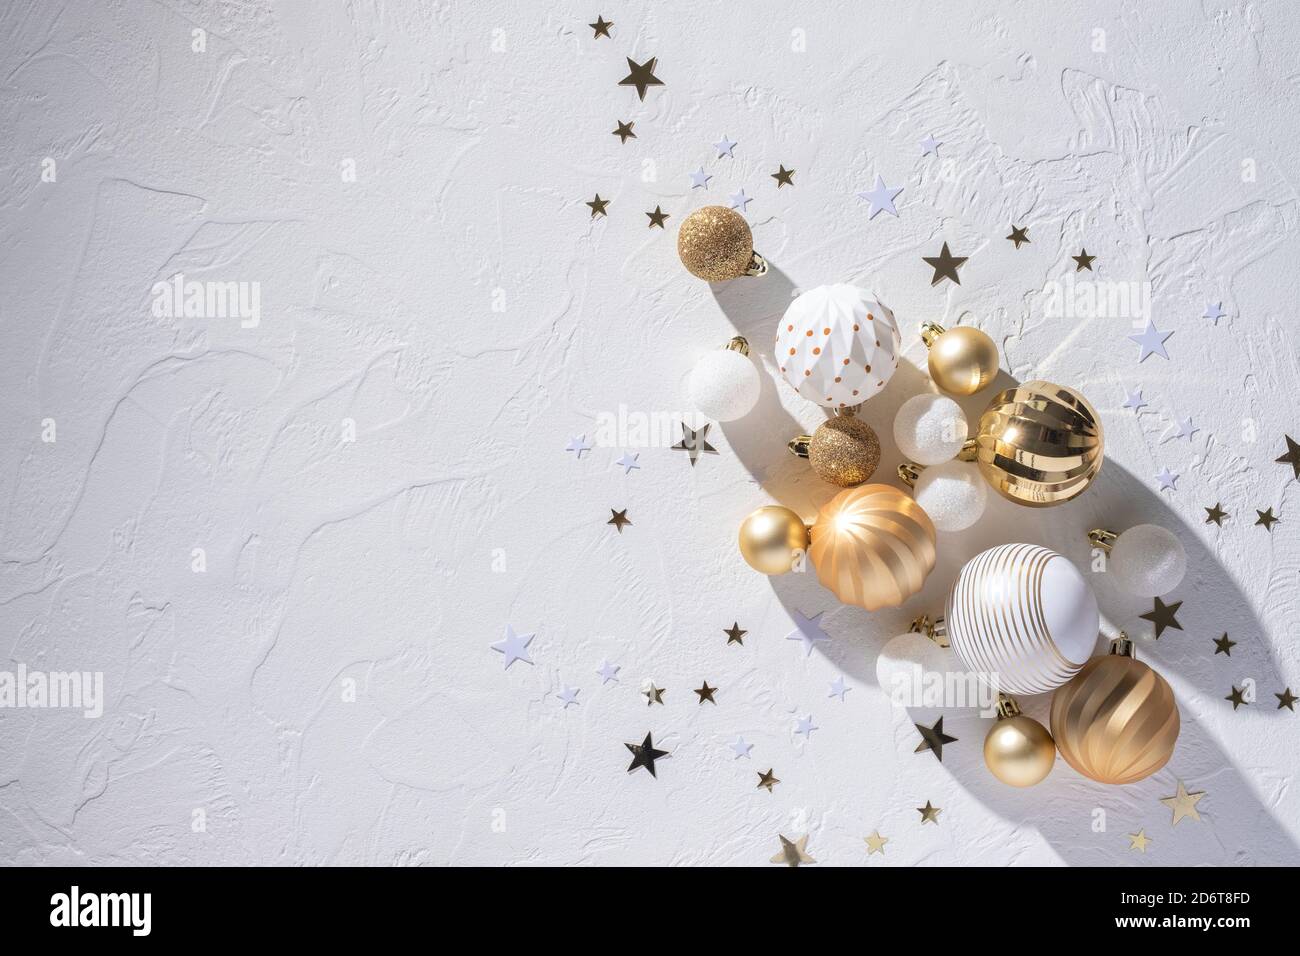 Christmas golden and white decorations Stock Photo